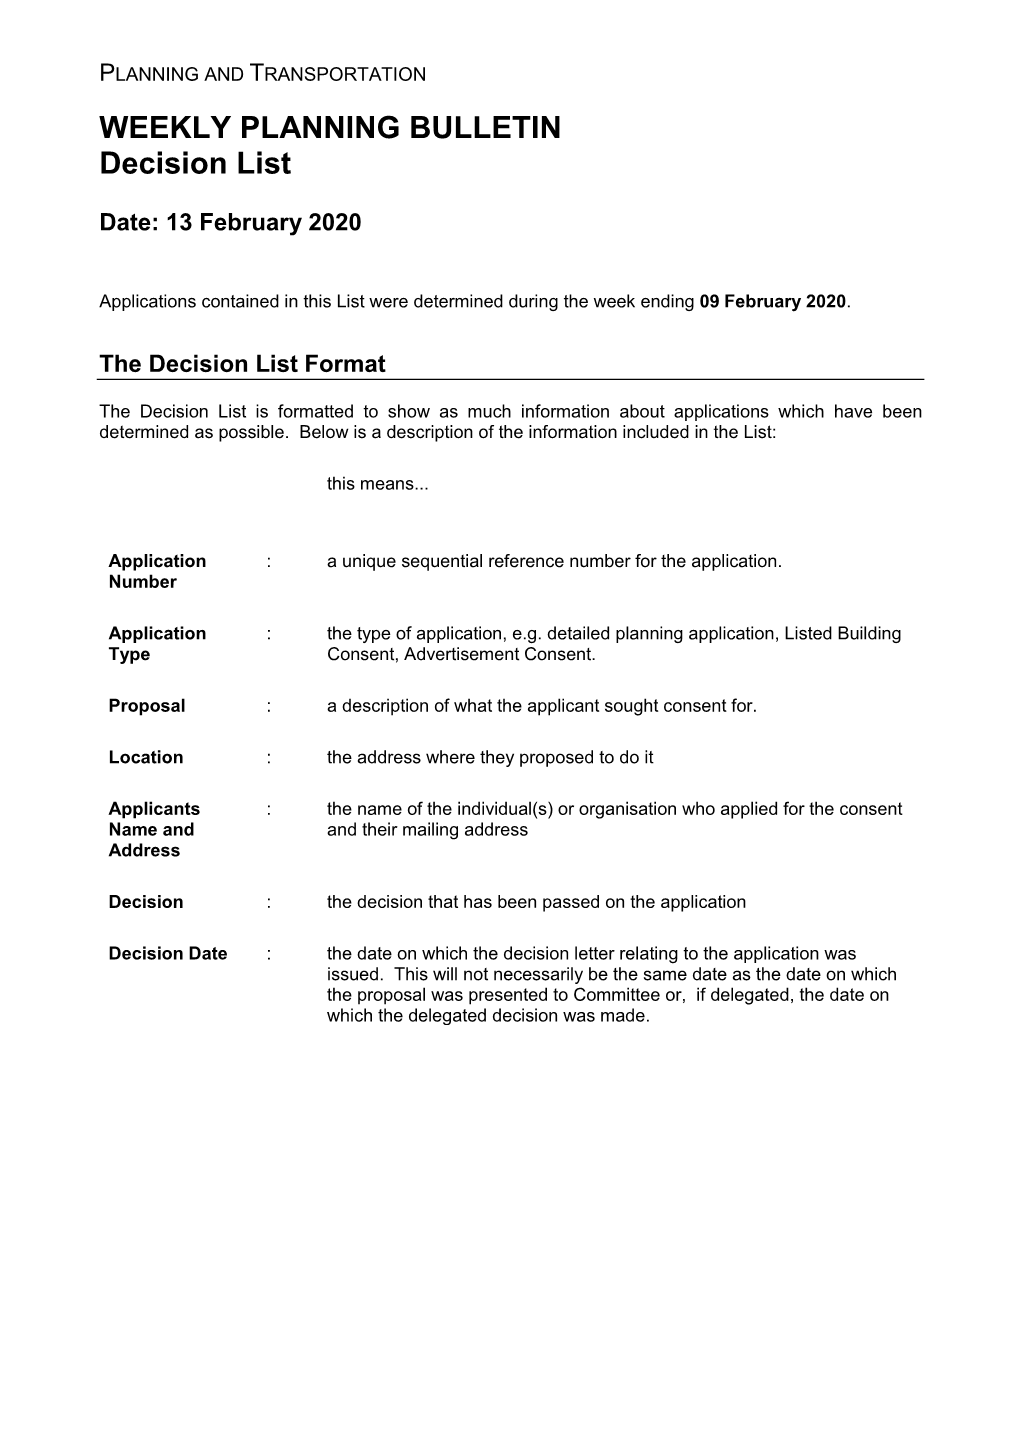 Planning Applications Determined 09 February 2020